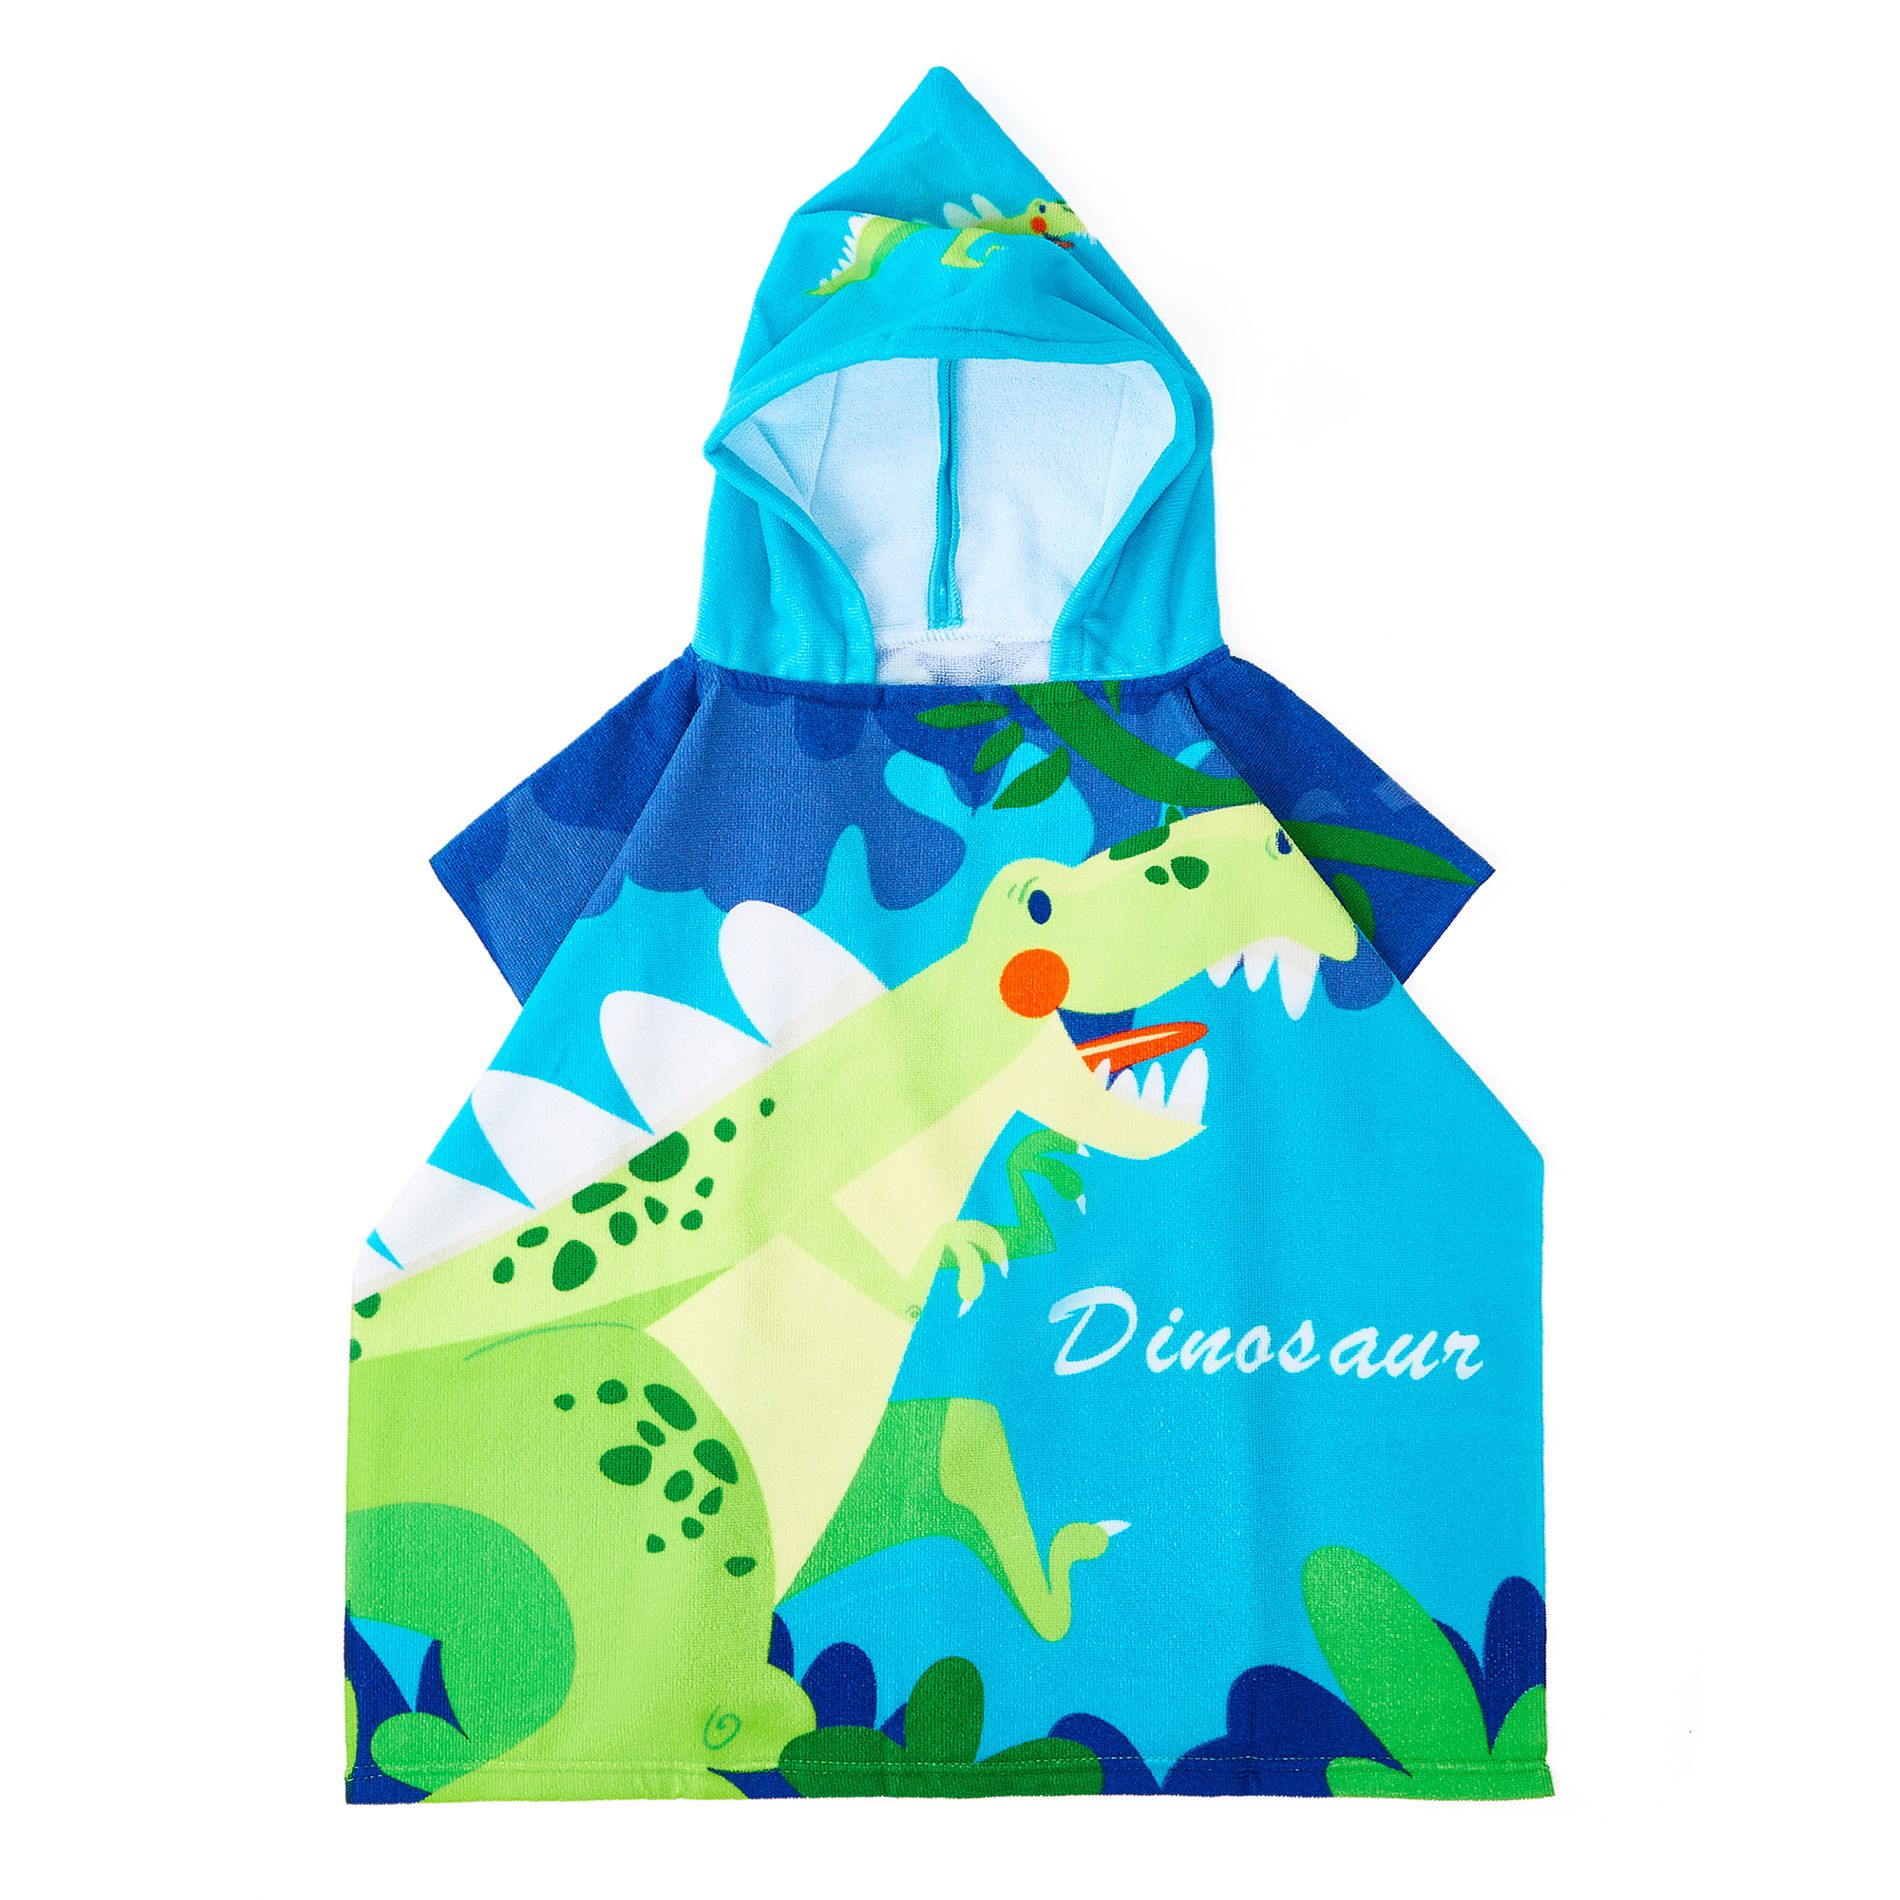 Adorable Dinosaur-Patterned Cape Bath Towel For Kids Up To 5 Years Old